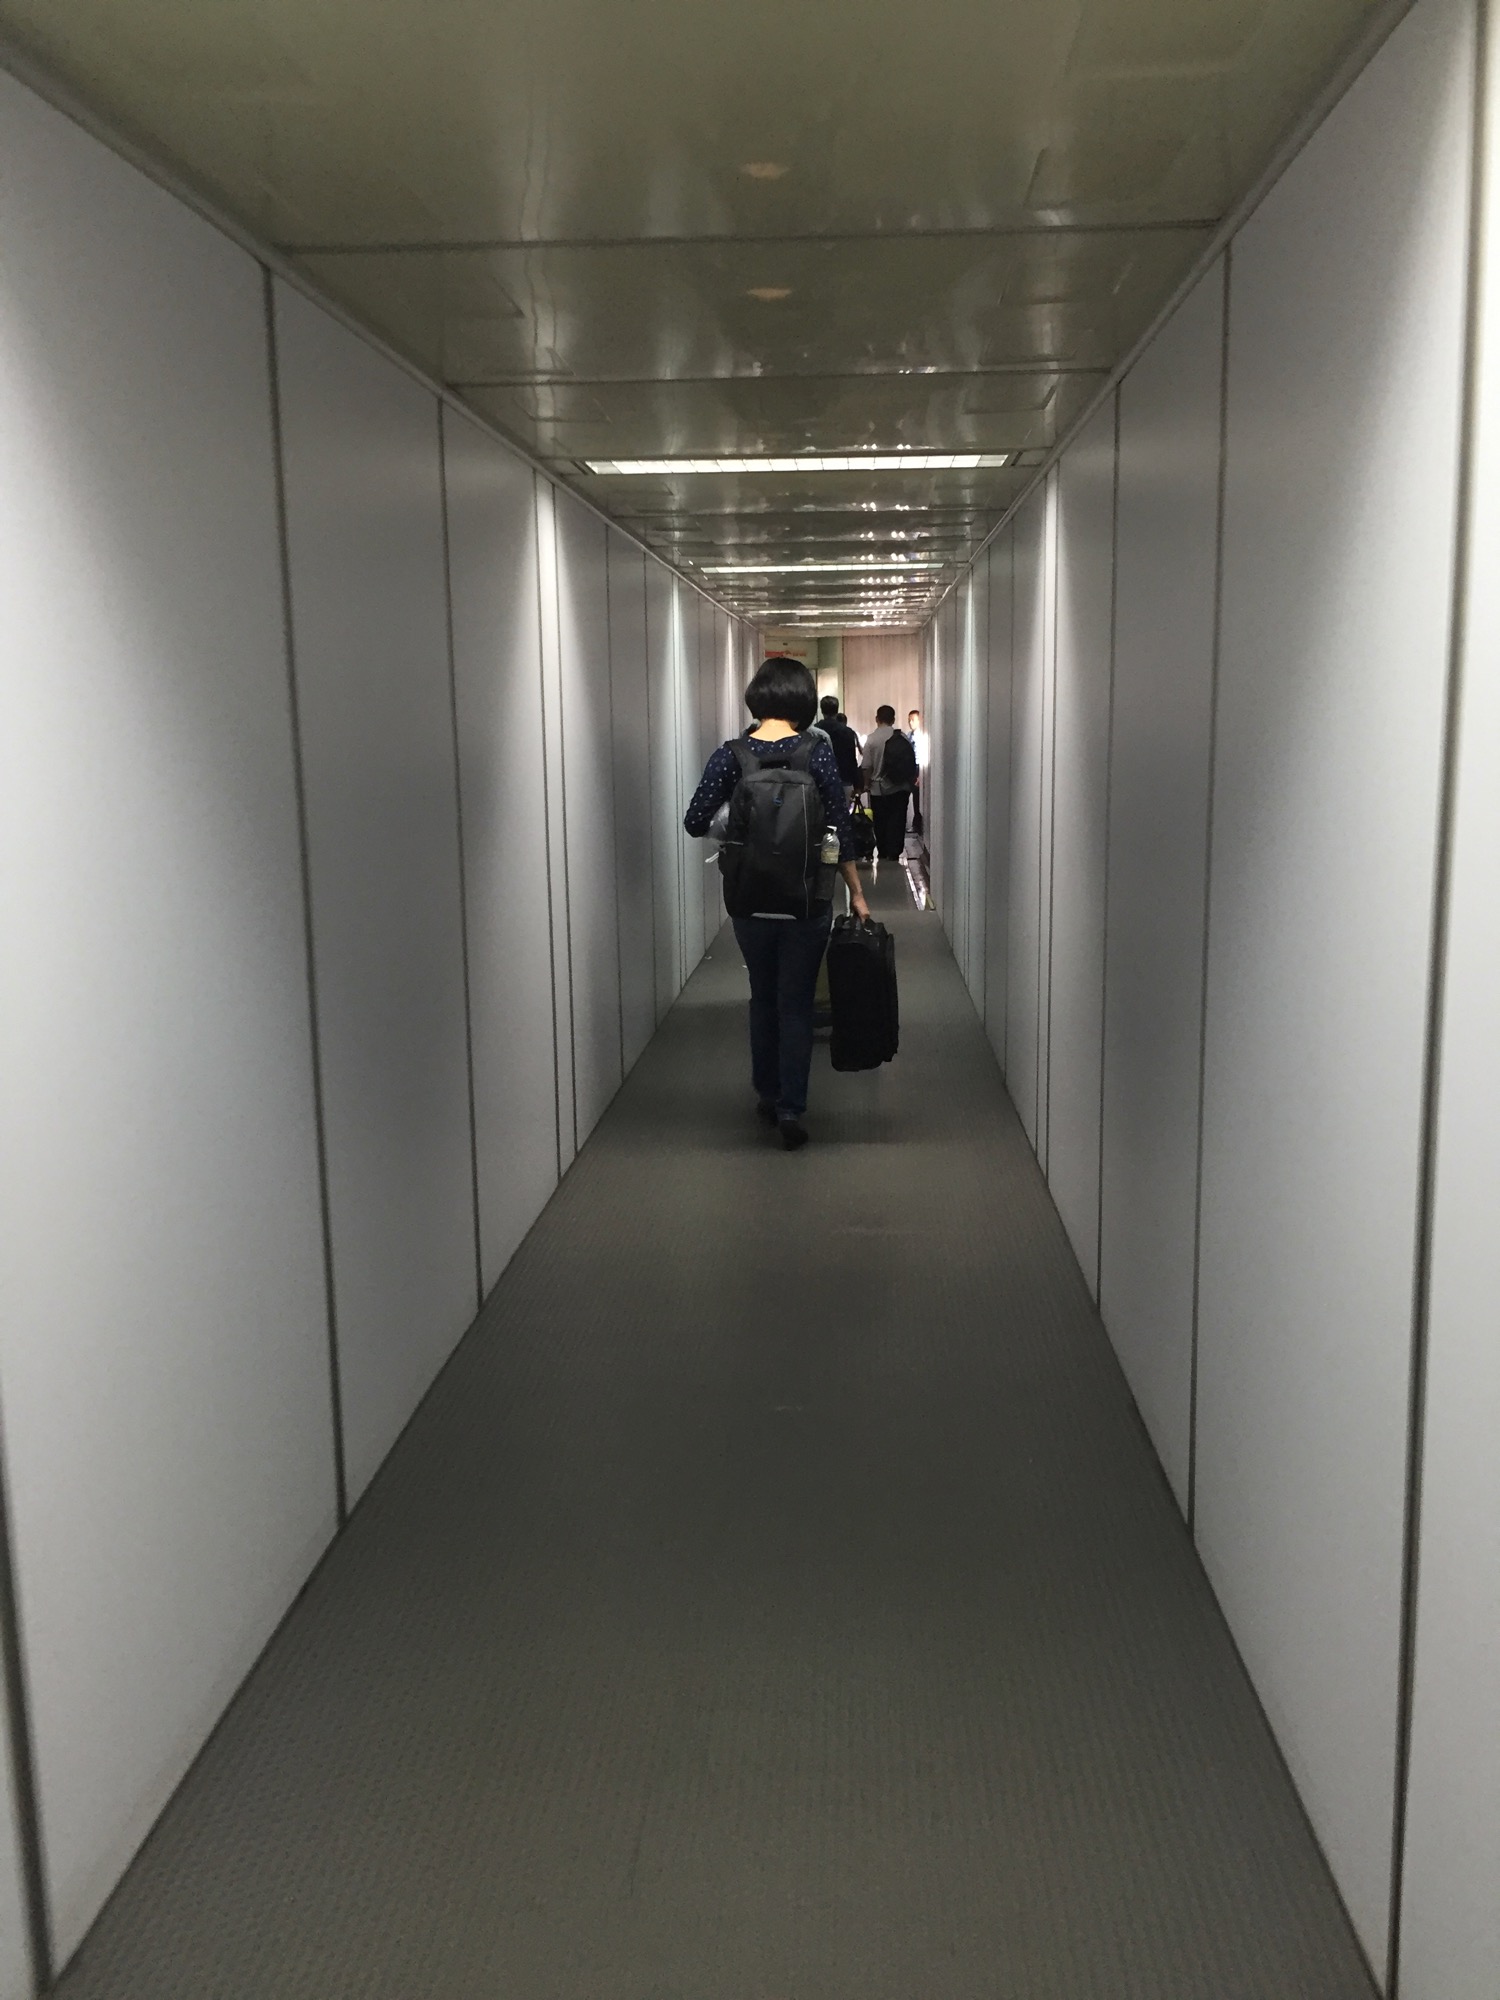 a person carrying luggage in a hallway